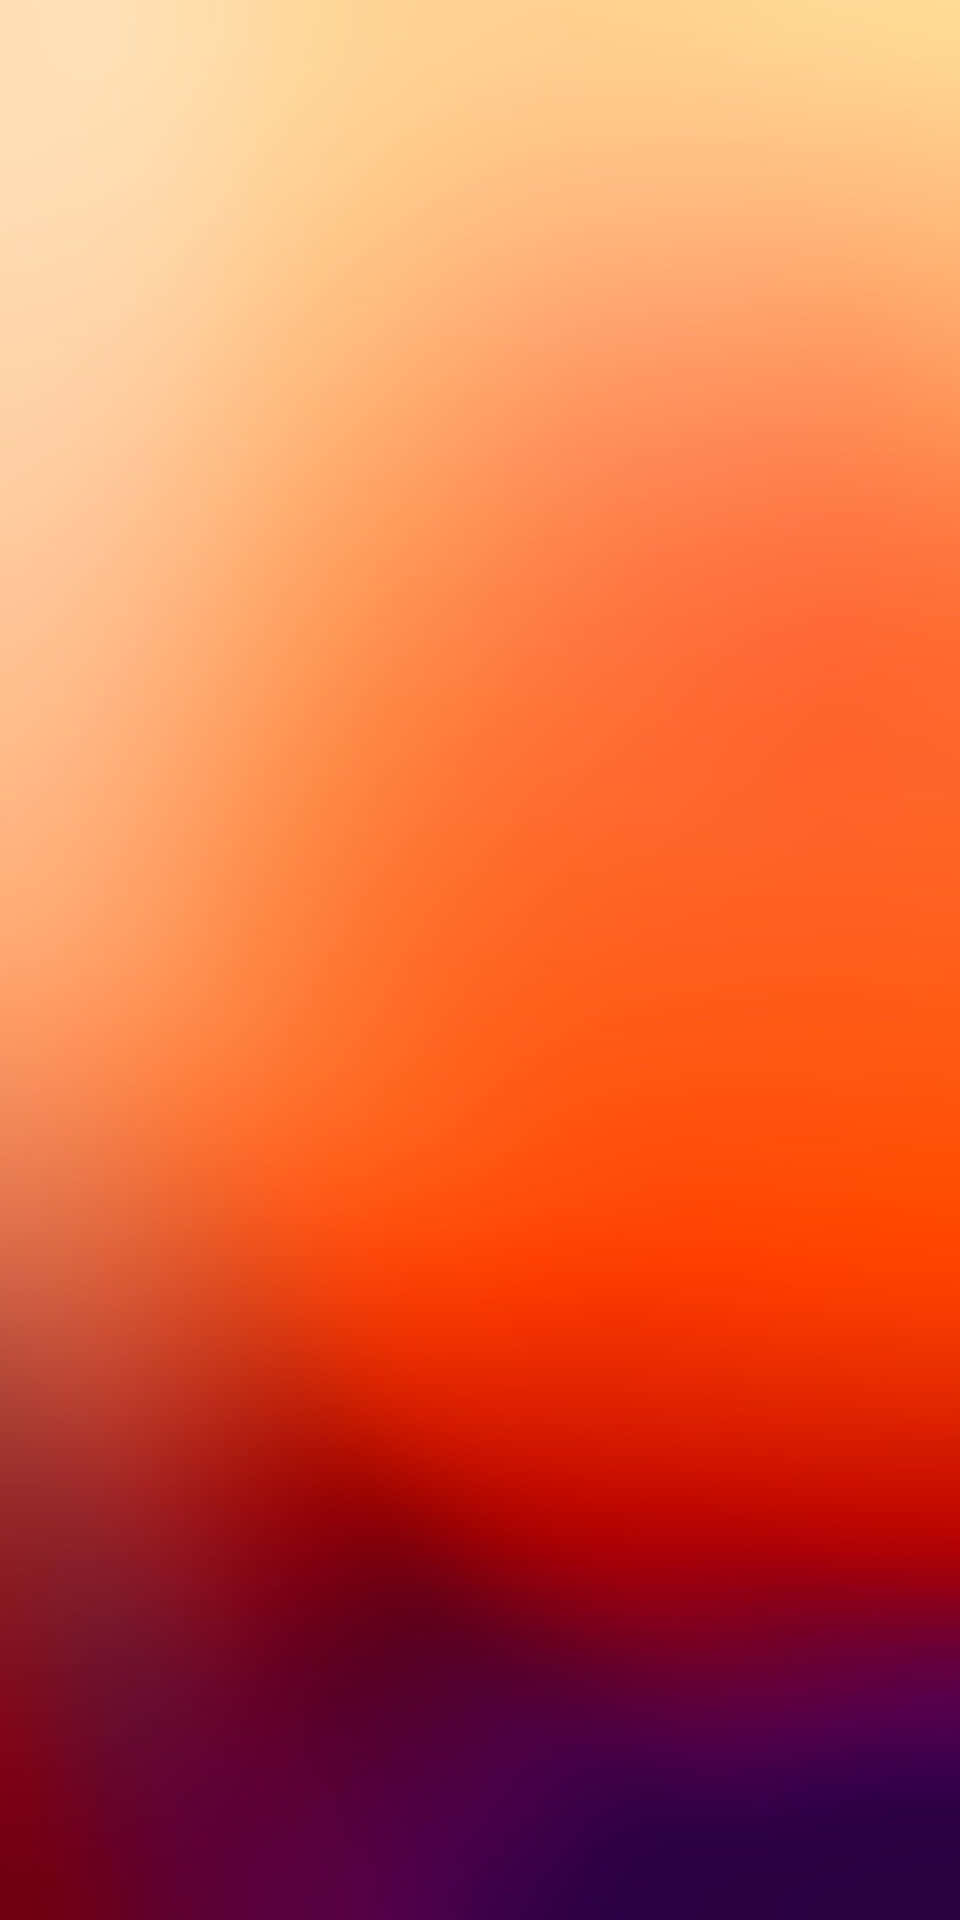 An orange gradient background with a blurred effect